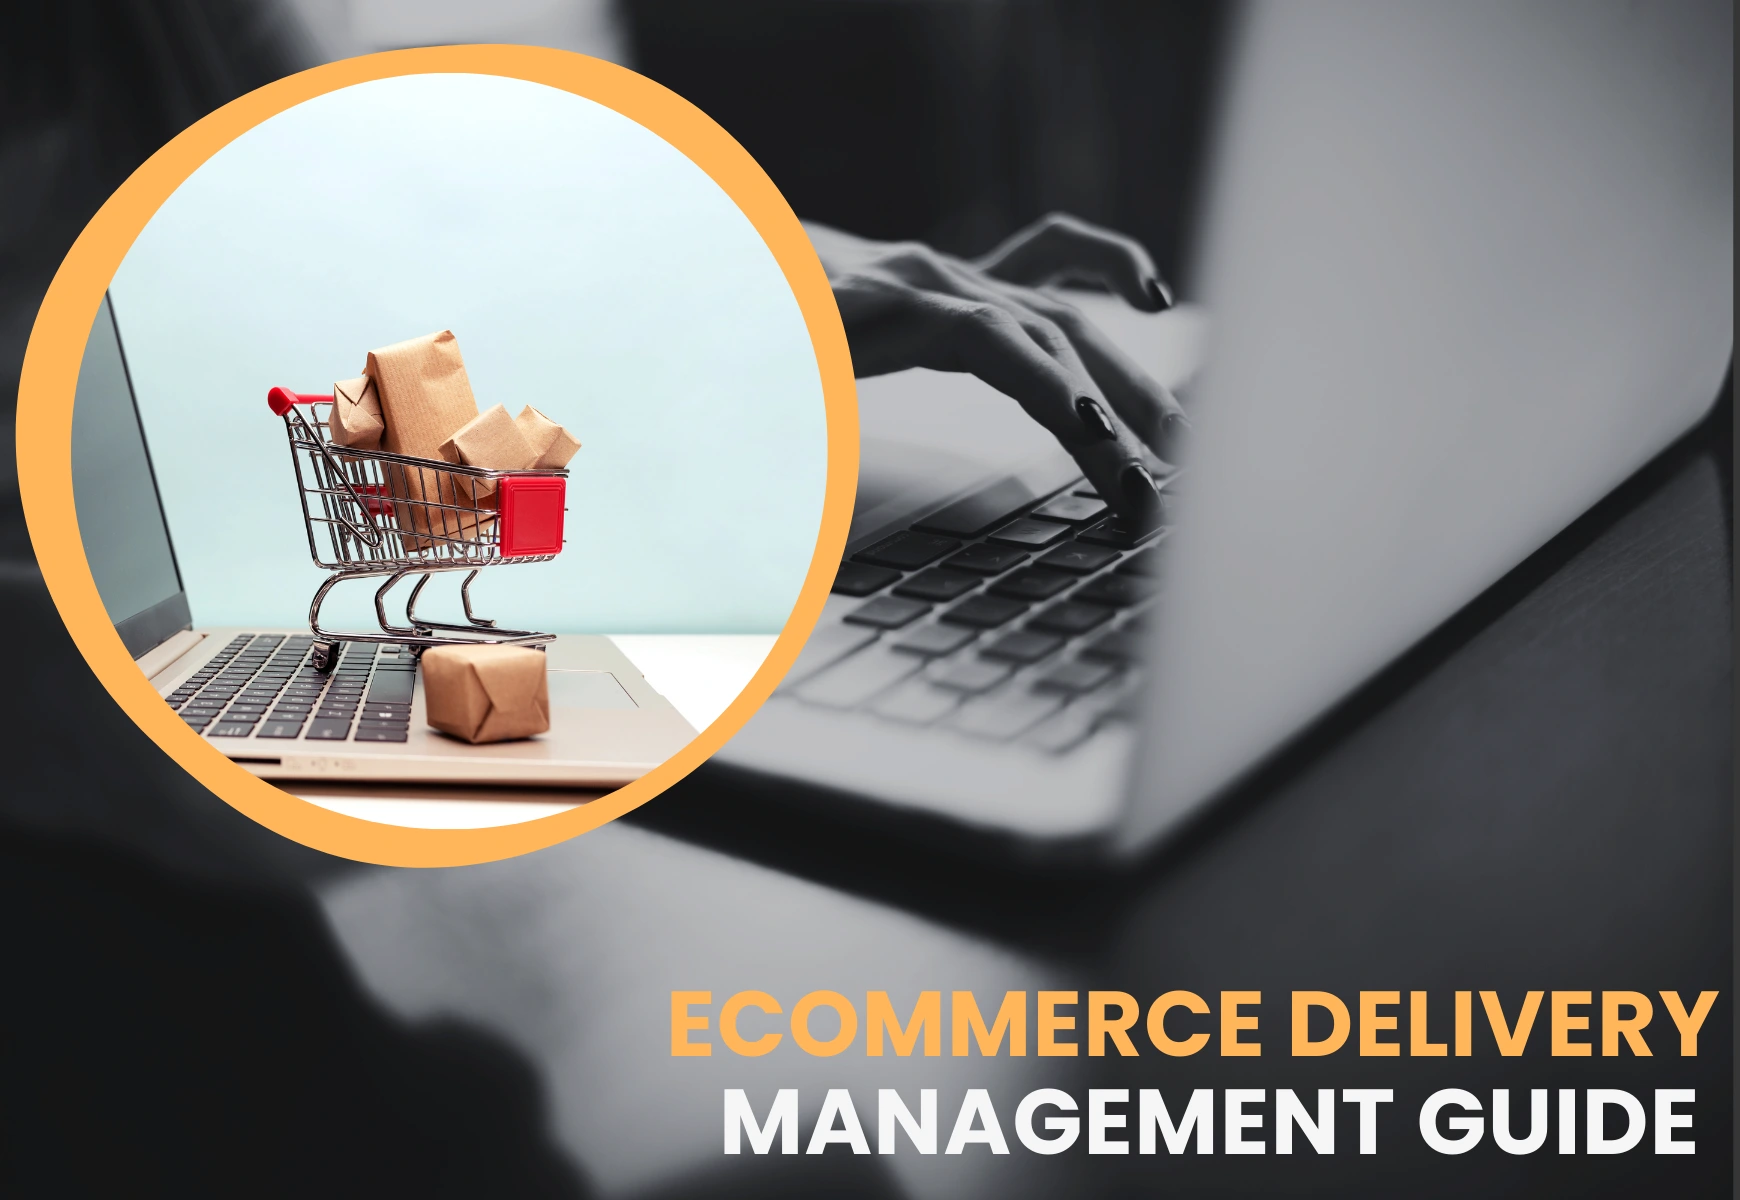 Ecommerce delivery management guide 